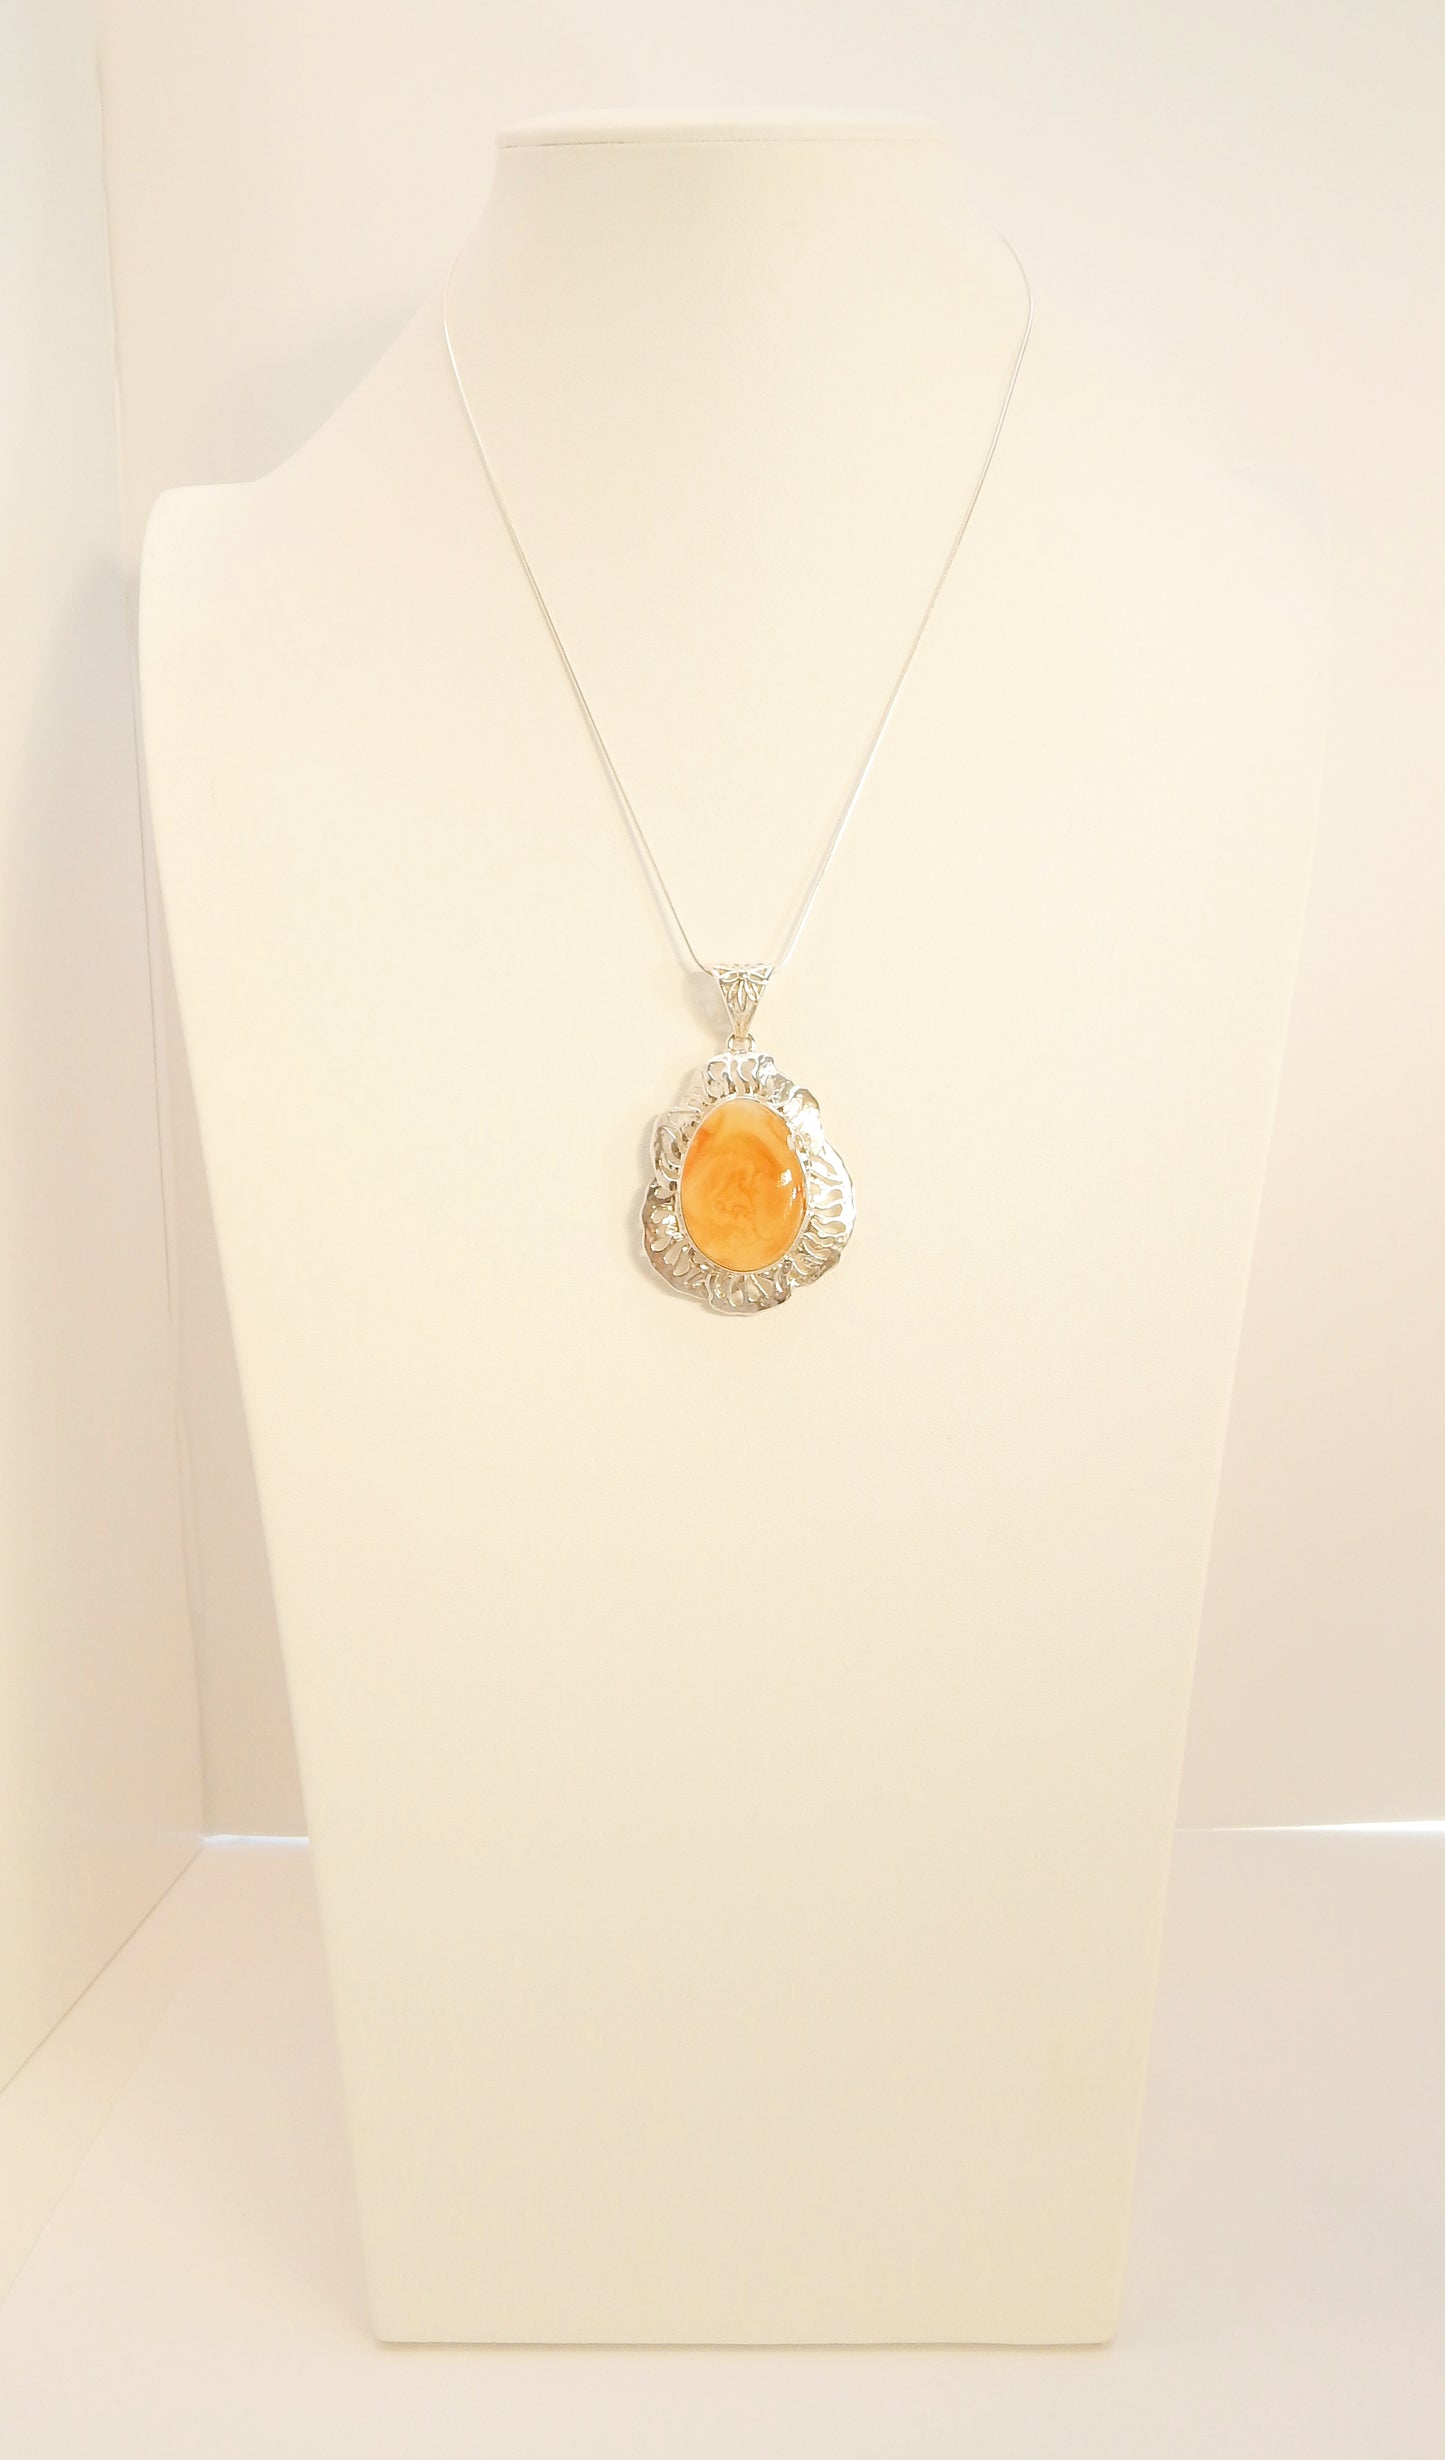 Handmade Natural Baltic Honey Amber Pendant Necklace in 925 Sterling Silver